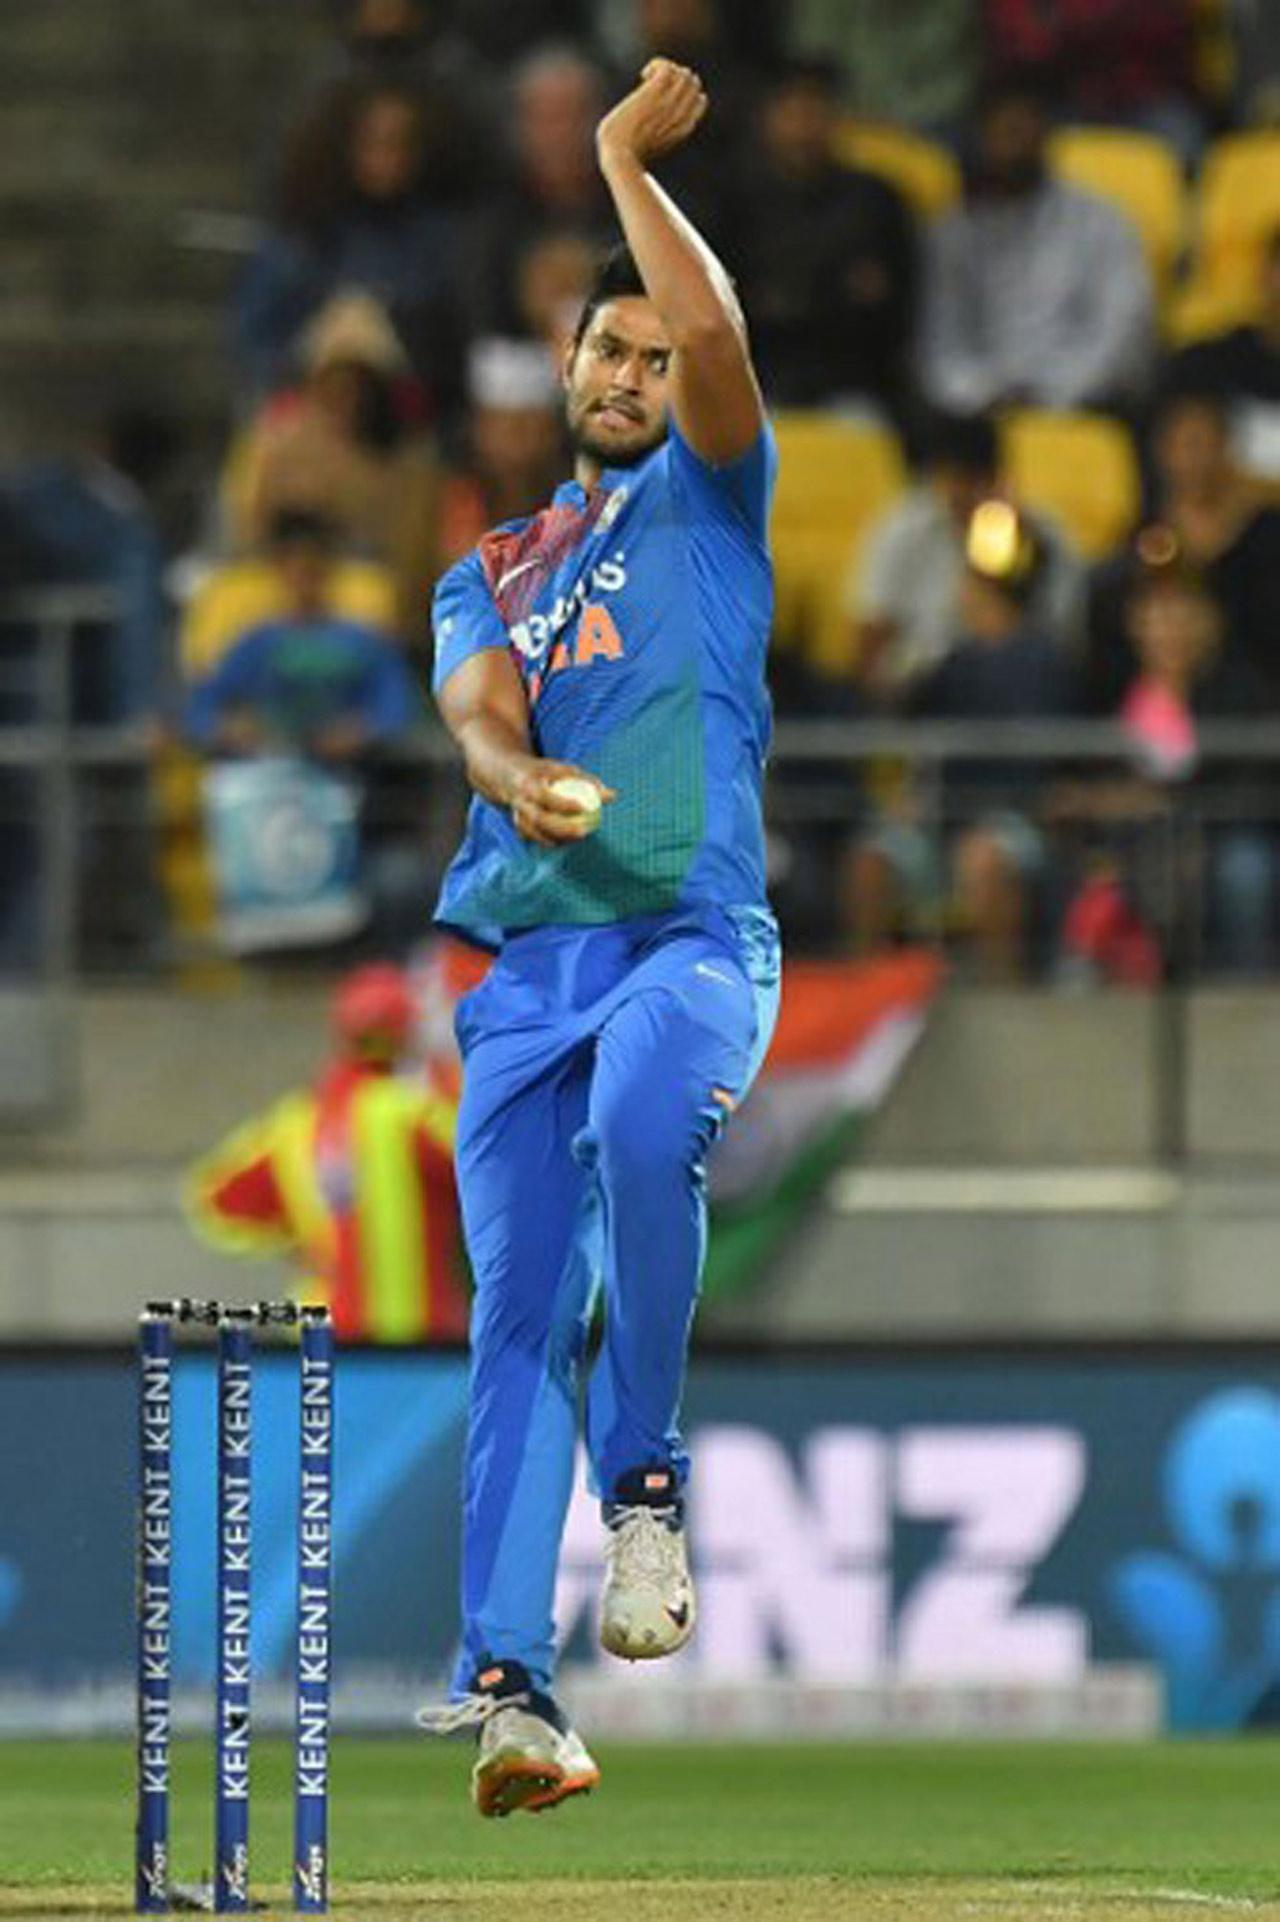 During the fifth T20I between India and New Zealand on February 5, 2020, Shivam Dube bowled the second-most expensive over in a T20I match after he conceded 34 runs. Tim Seifert and Ross Taylor scored 17 runs each off his over.